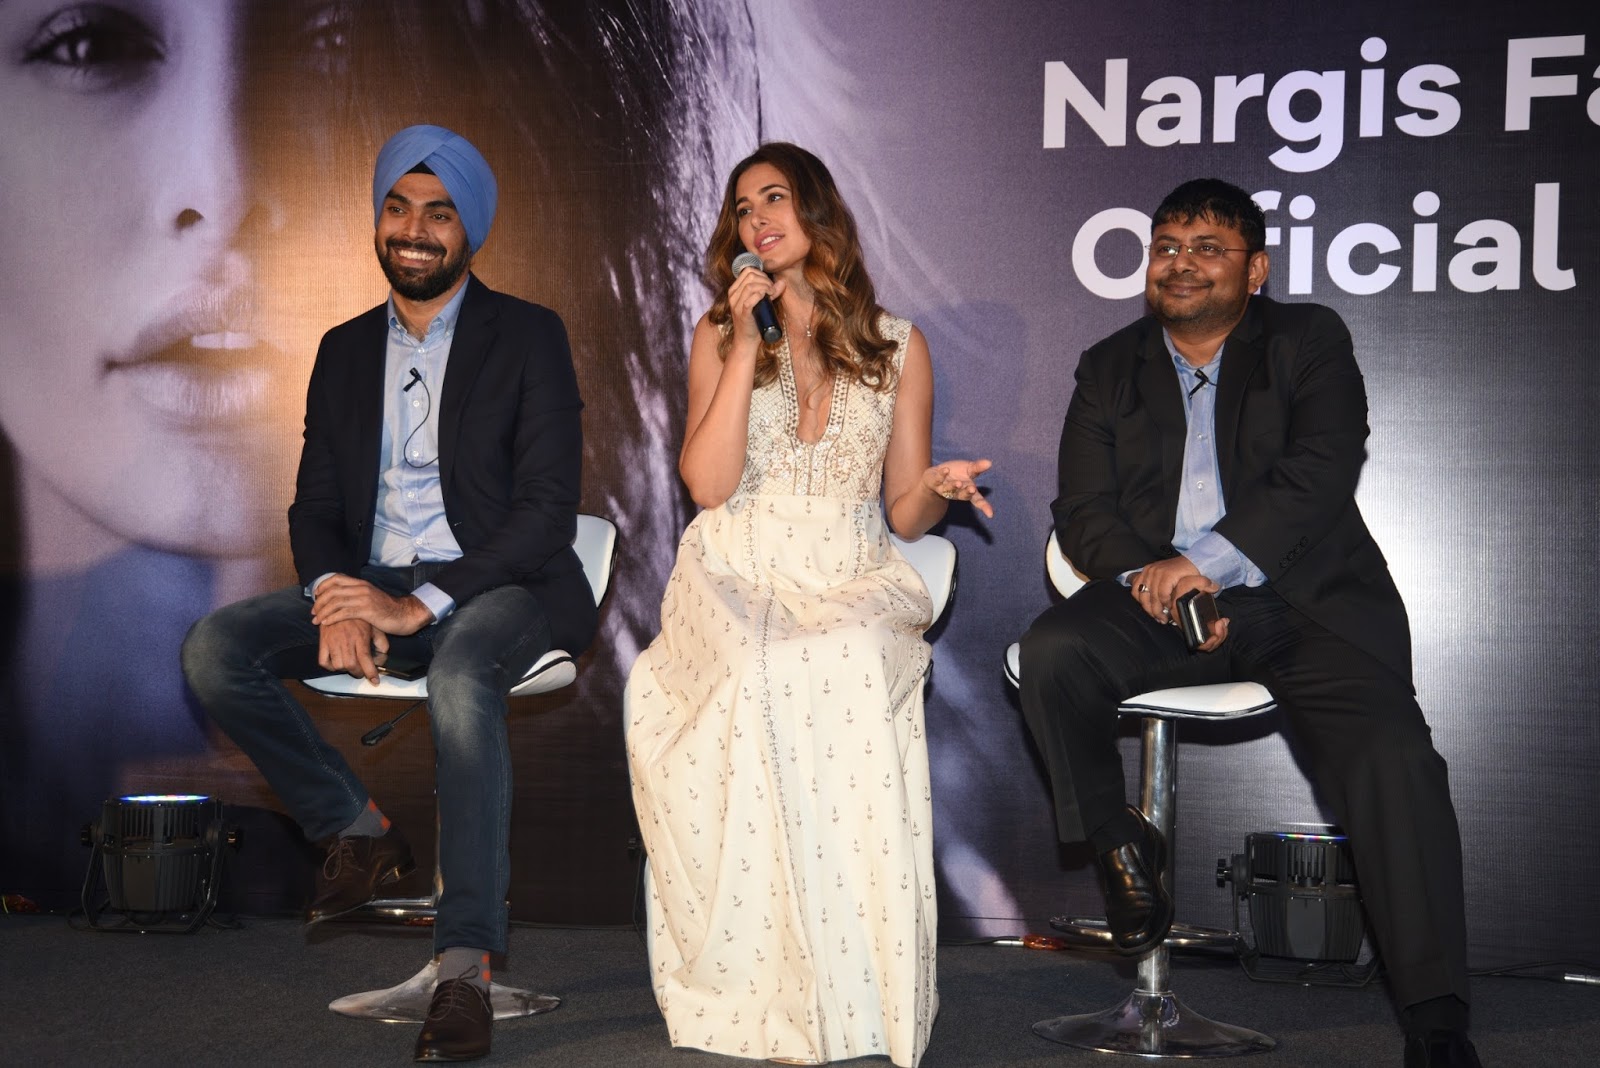 Nargis Fakhri Looks Hot in a White Dress At The Launch Event of Her Own App in Mumbai